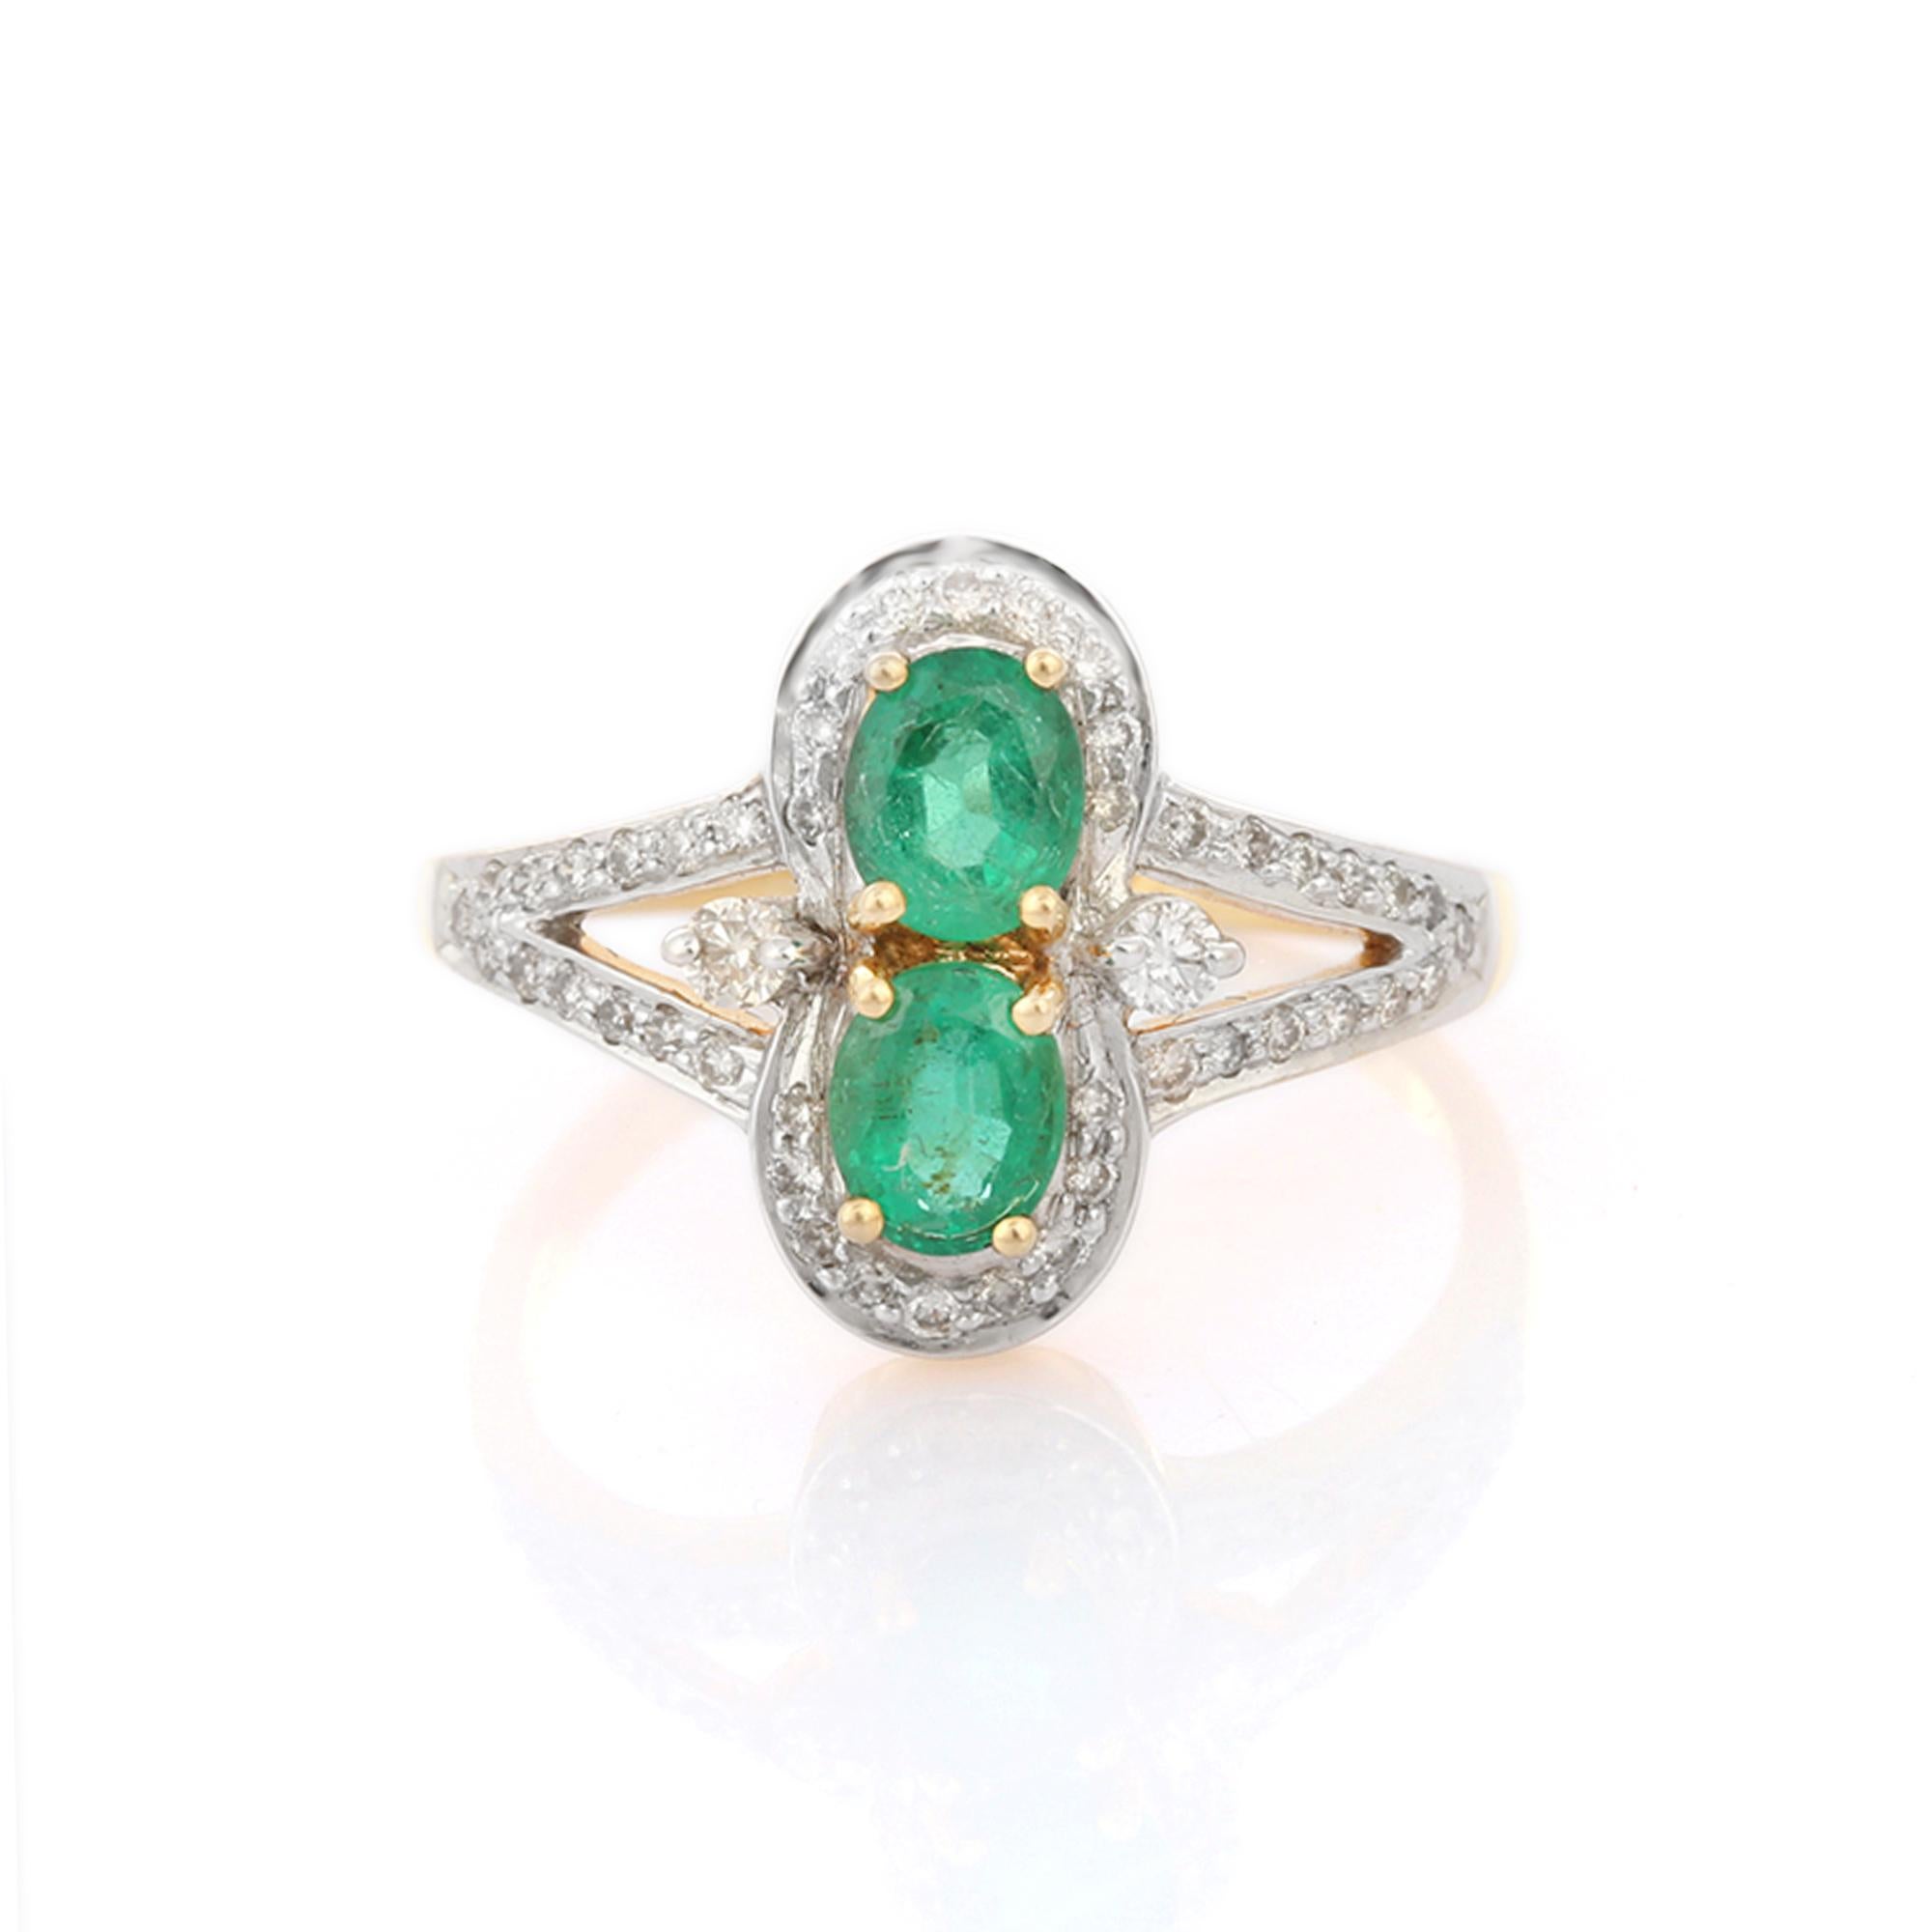 For Sale:  Magnificent Two Emerald Wedding Ring with Halo Diamonds in 18K Yellow Gold  5